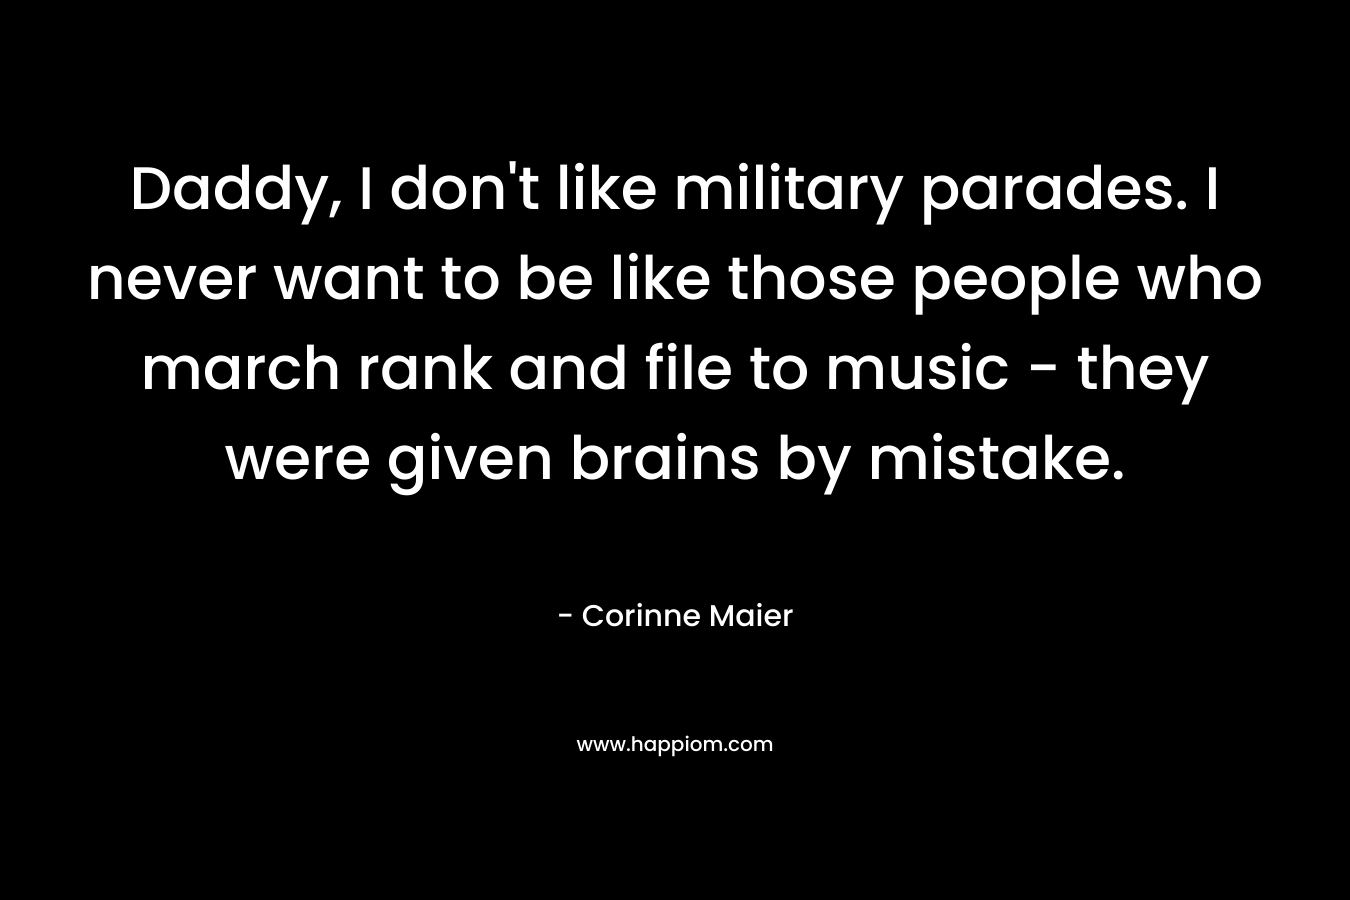 Daddy, I don't like military parades. I never want to be like those people who march rank and file to music - they were given brains by mistake.